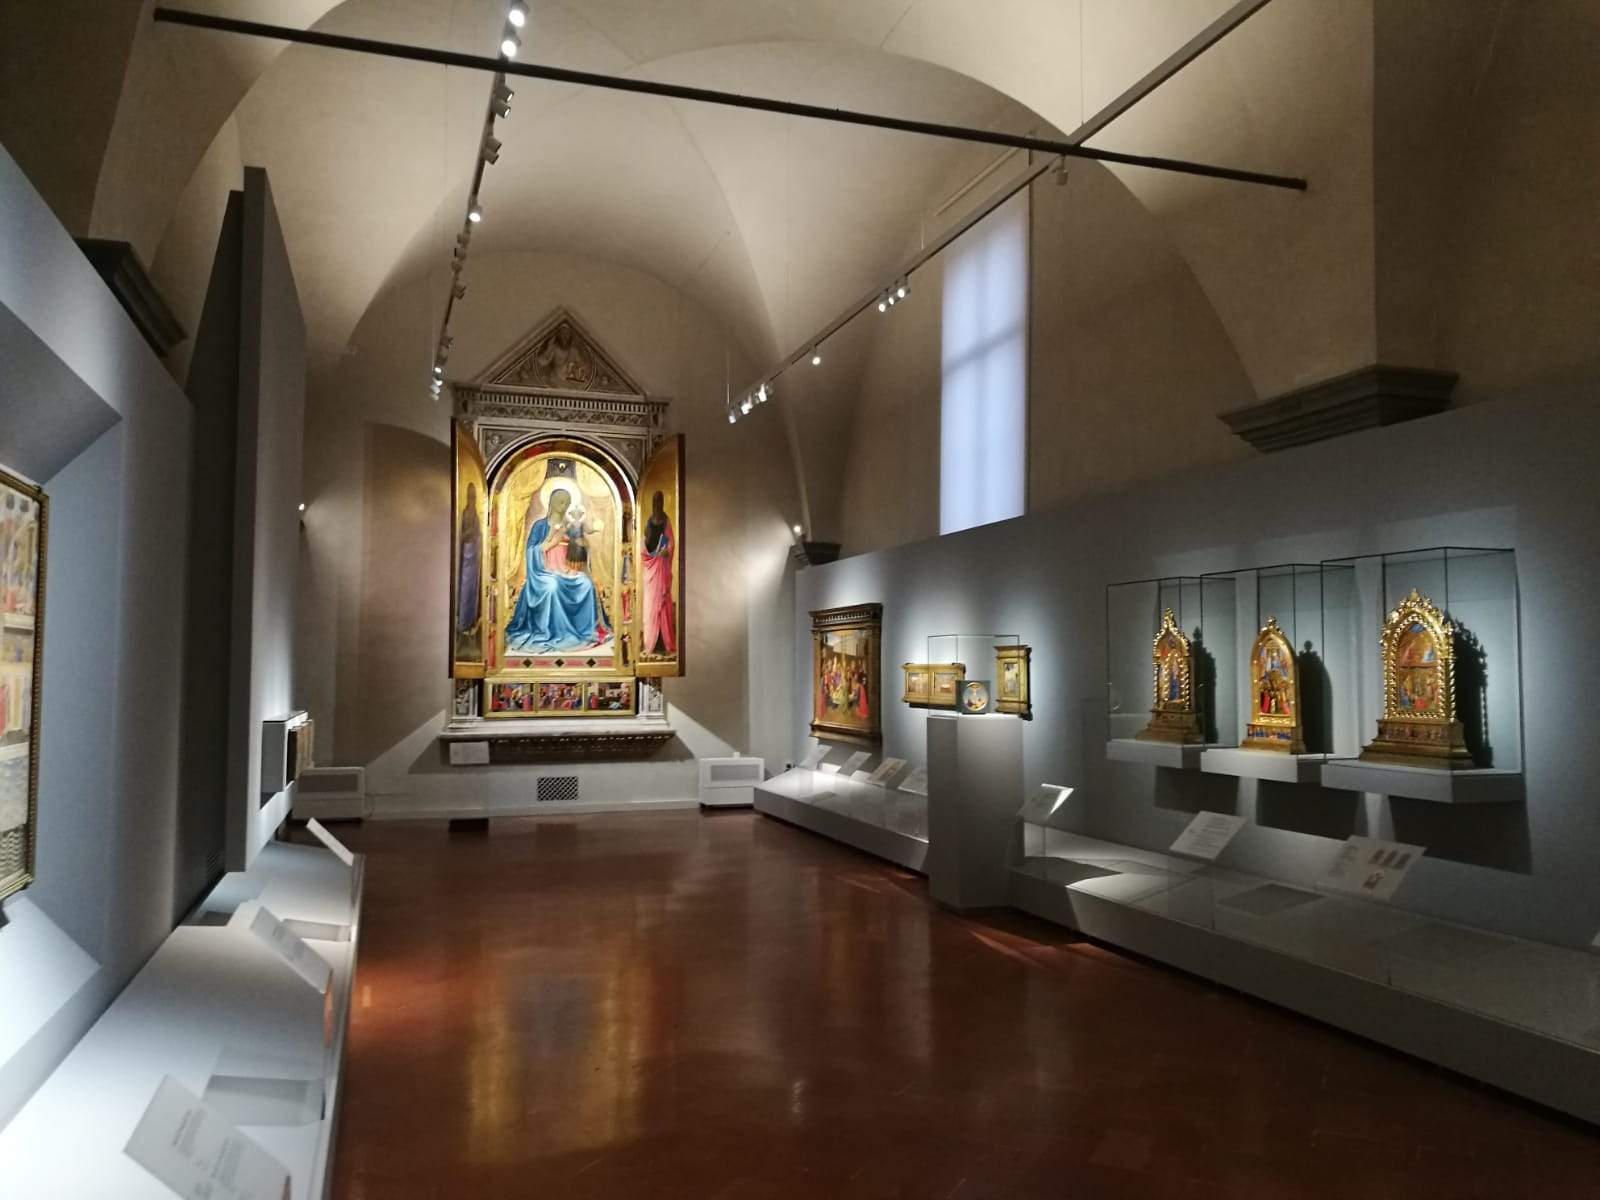 Tuscany, regional museums reopen. Also San Marco with new Beato Angelico room.